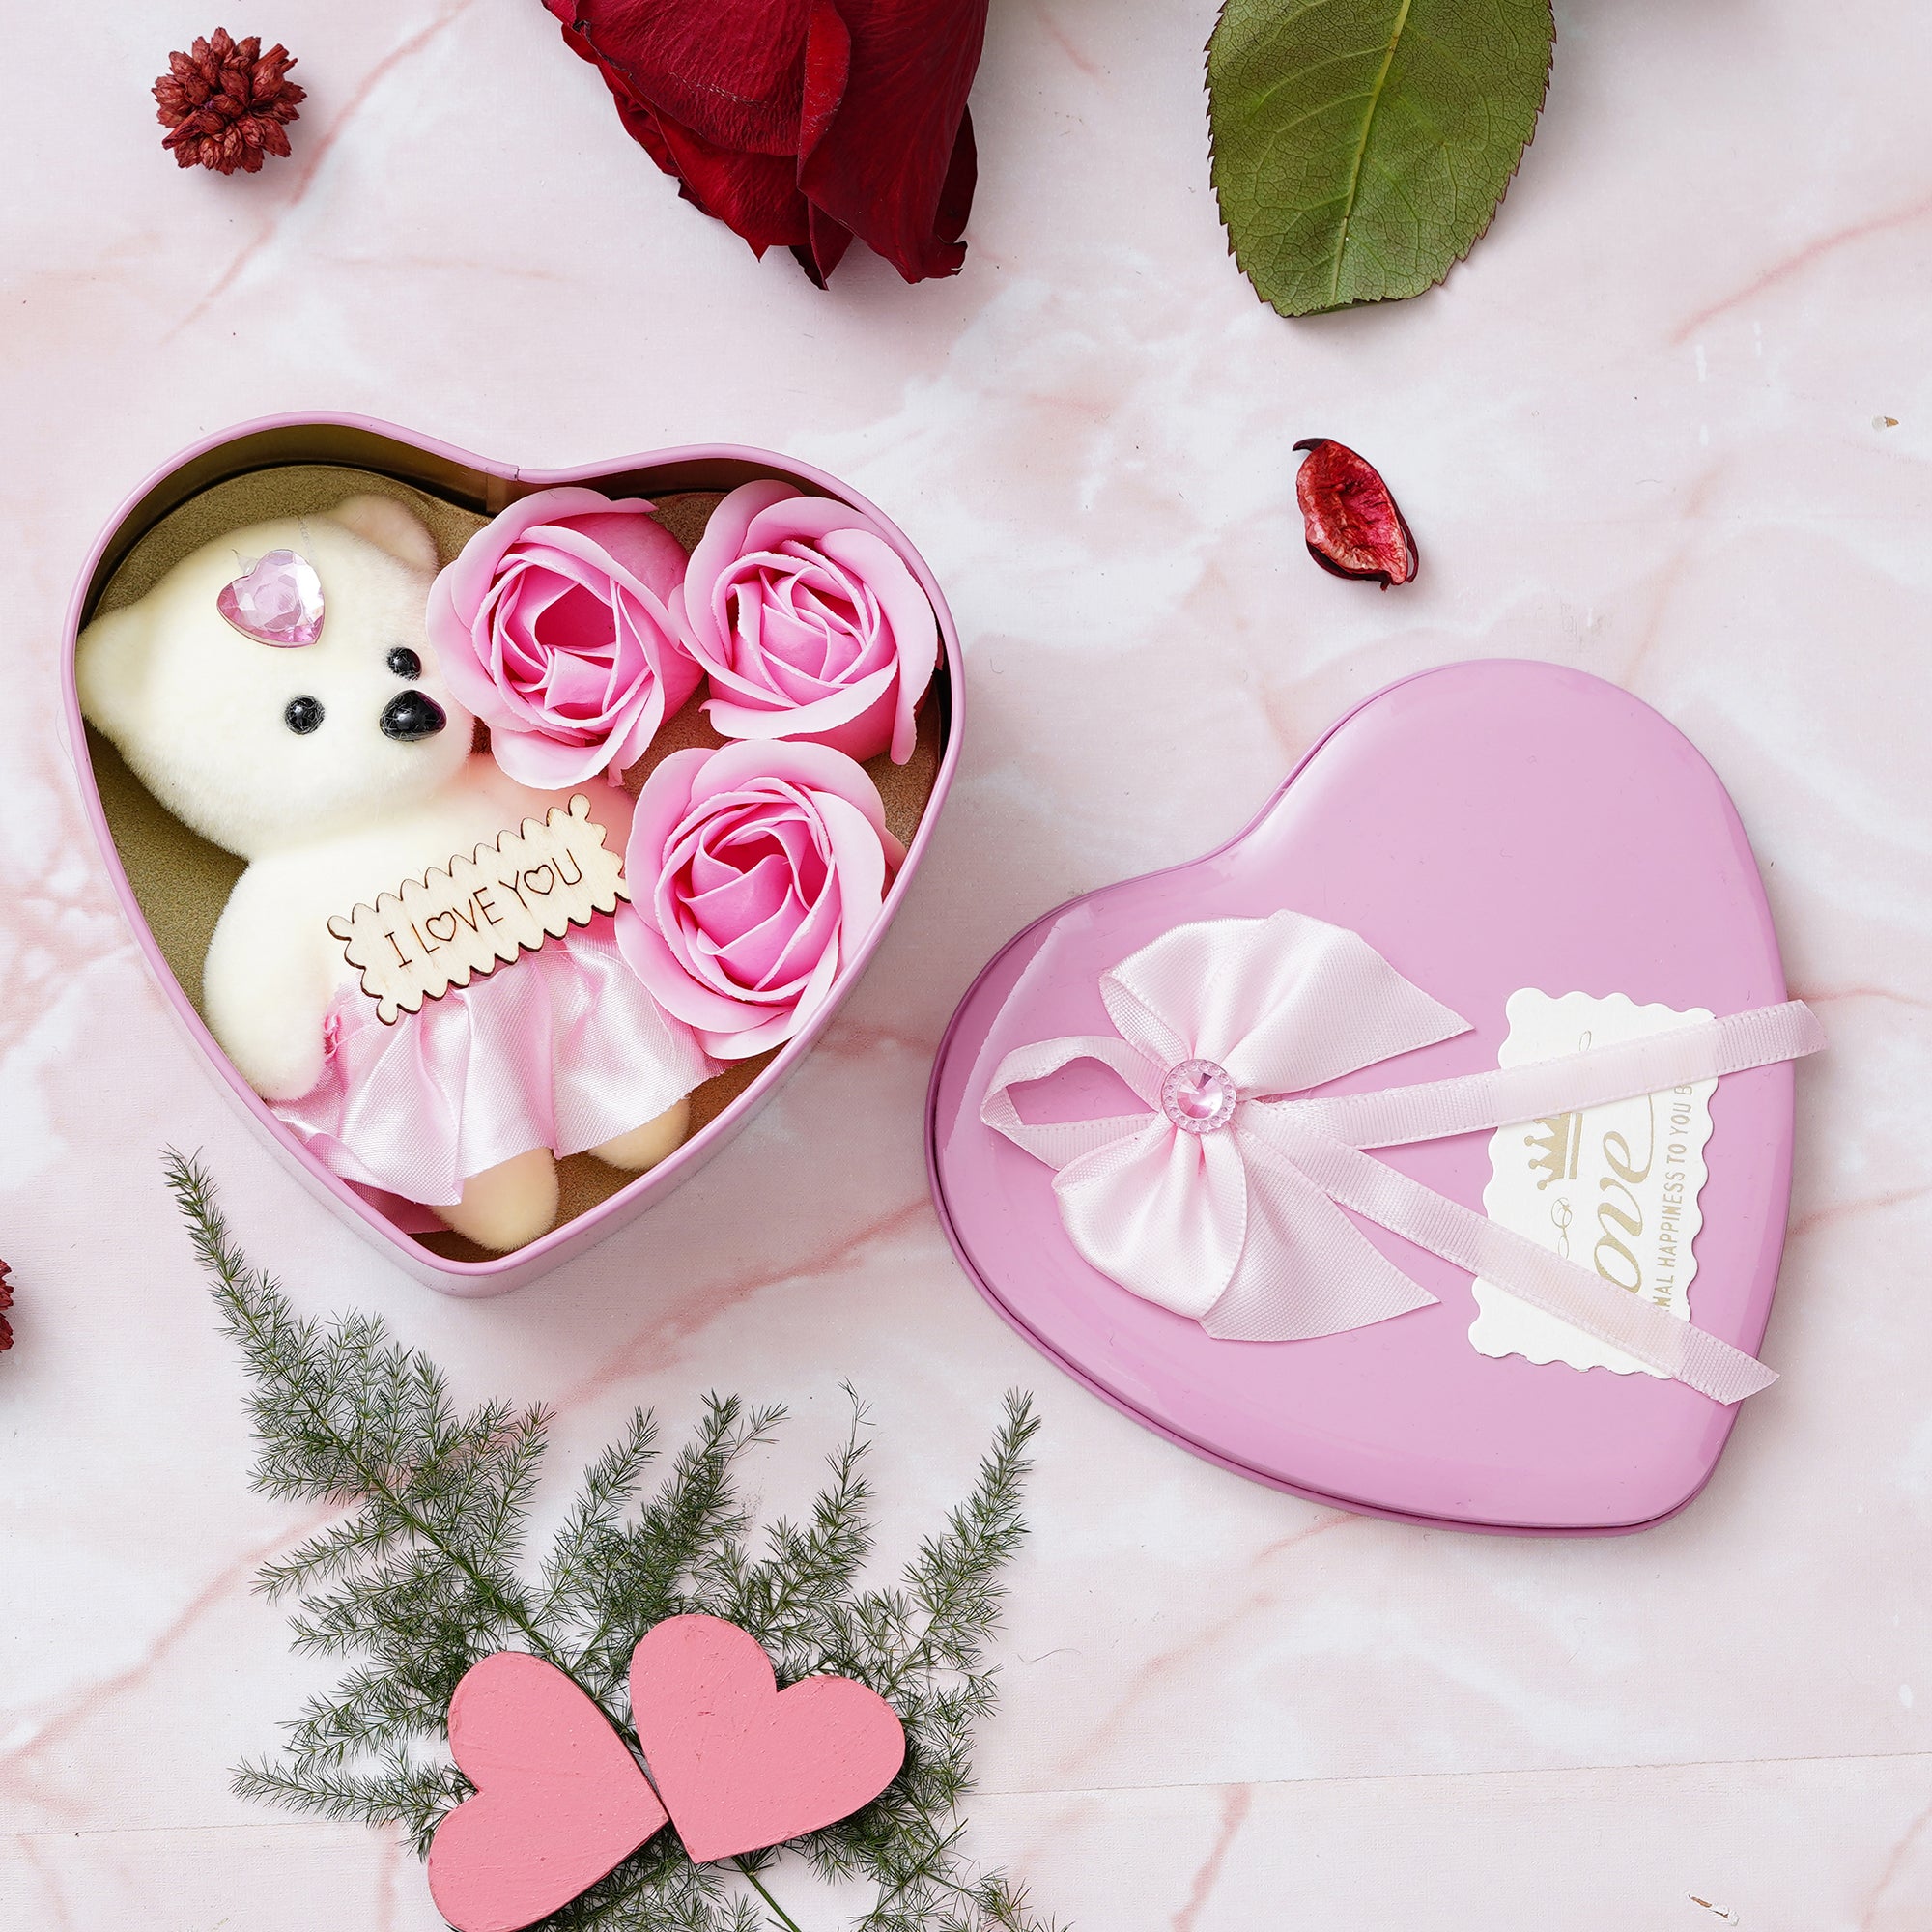 Valentine Combo of Card, "20 Reasons Why I Love You" Printed on Little Red Hearts Decorative Wooden Gift Set Box, Pink Heart Shaped Gift Box with Teddy and Roses 5